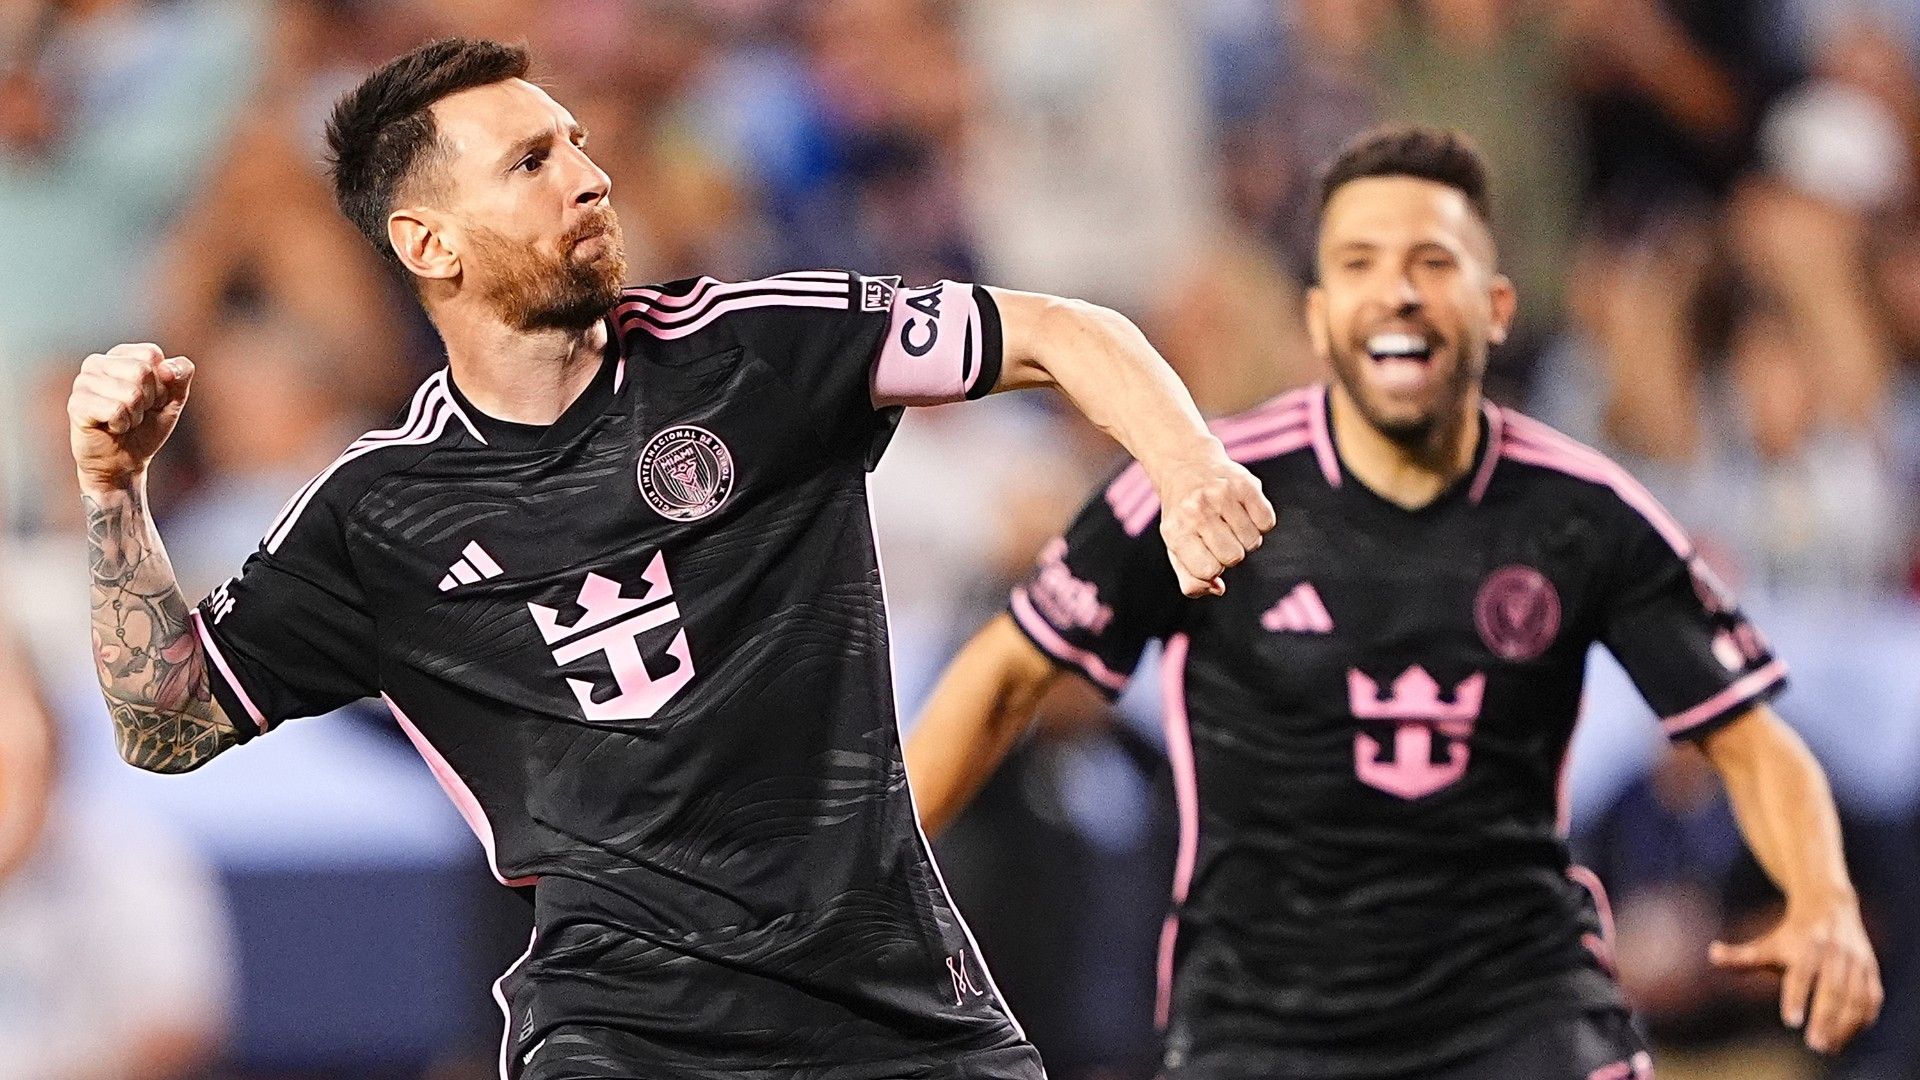 Lionel Messi wins prestigious MLS award for first time since Inter Miami  transfer after dazzling performance against Sporting Kansas City puts him  in record books alongside USMNT legend Landon Donovan   Thierry